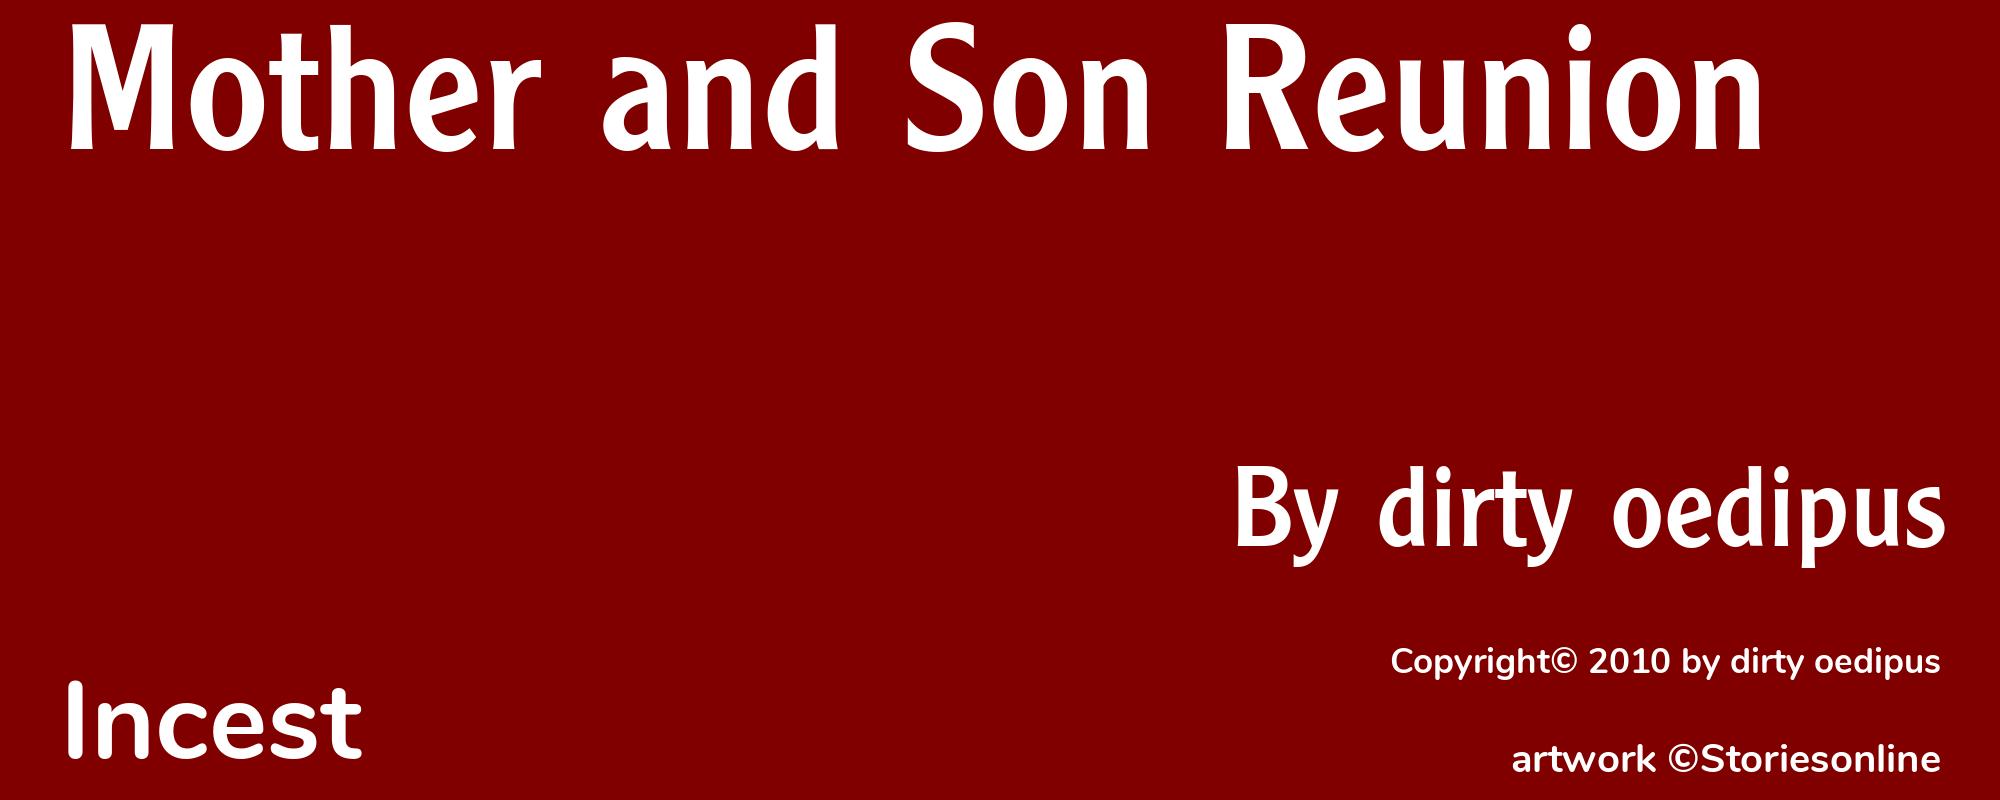 Mother and Son Reunion - Cover